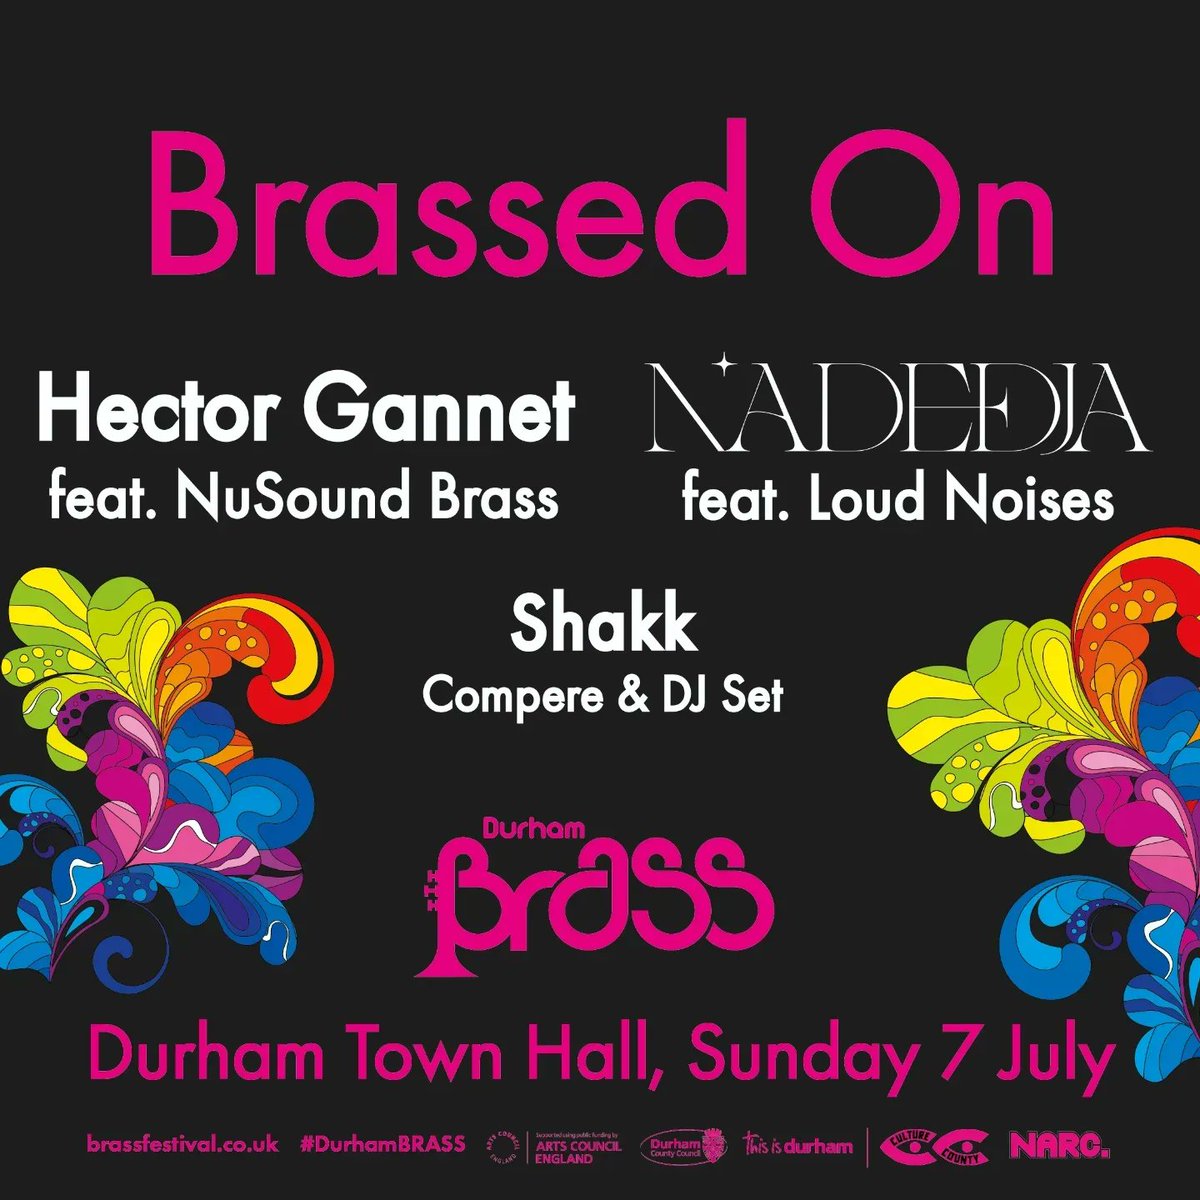 🎺 Tickets are on-sale NOW for this very special show! We'll be performing at @durhambrass Festival, Durham Town Hall on Sunday 7th July accompanied by the magnificent NuSound Brass band. Head to: brassfestival.co.uk/book-online/?E… 📷 @_victoriawai_ #LO143 #hectorgannet #durhambrass